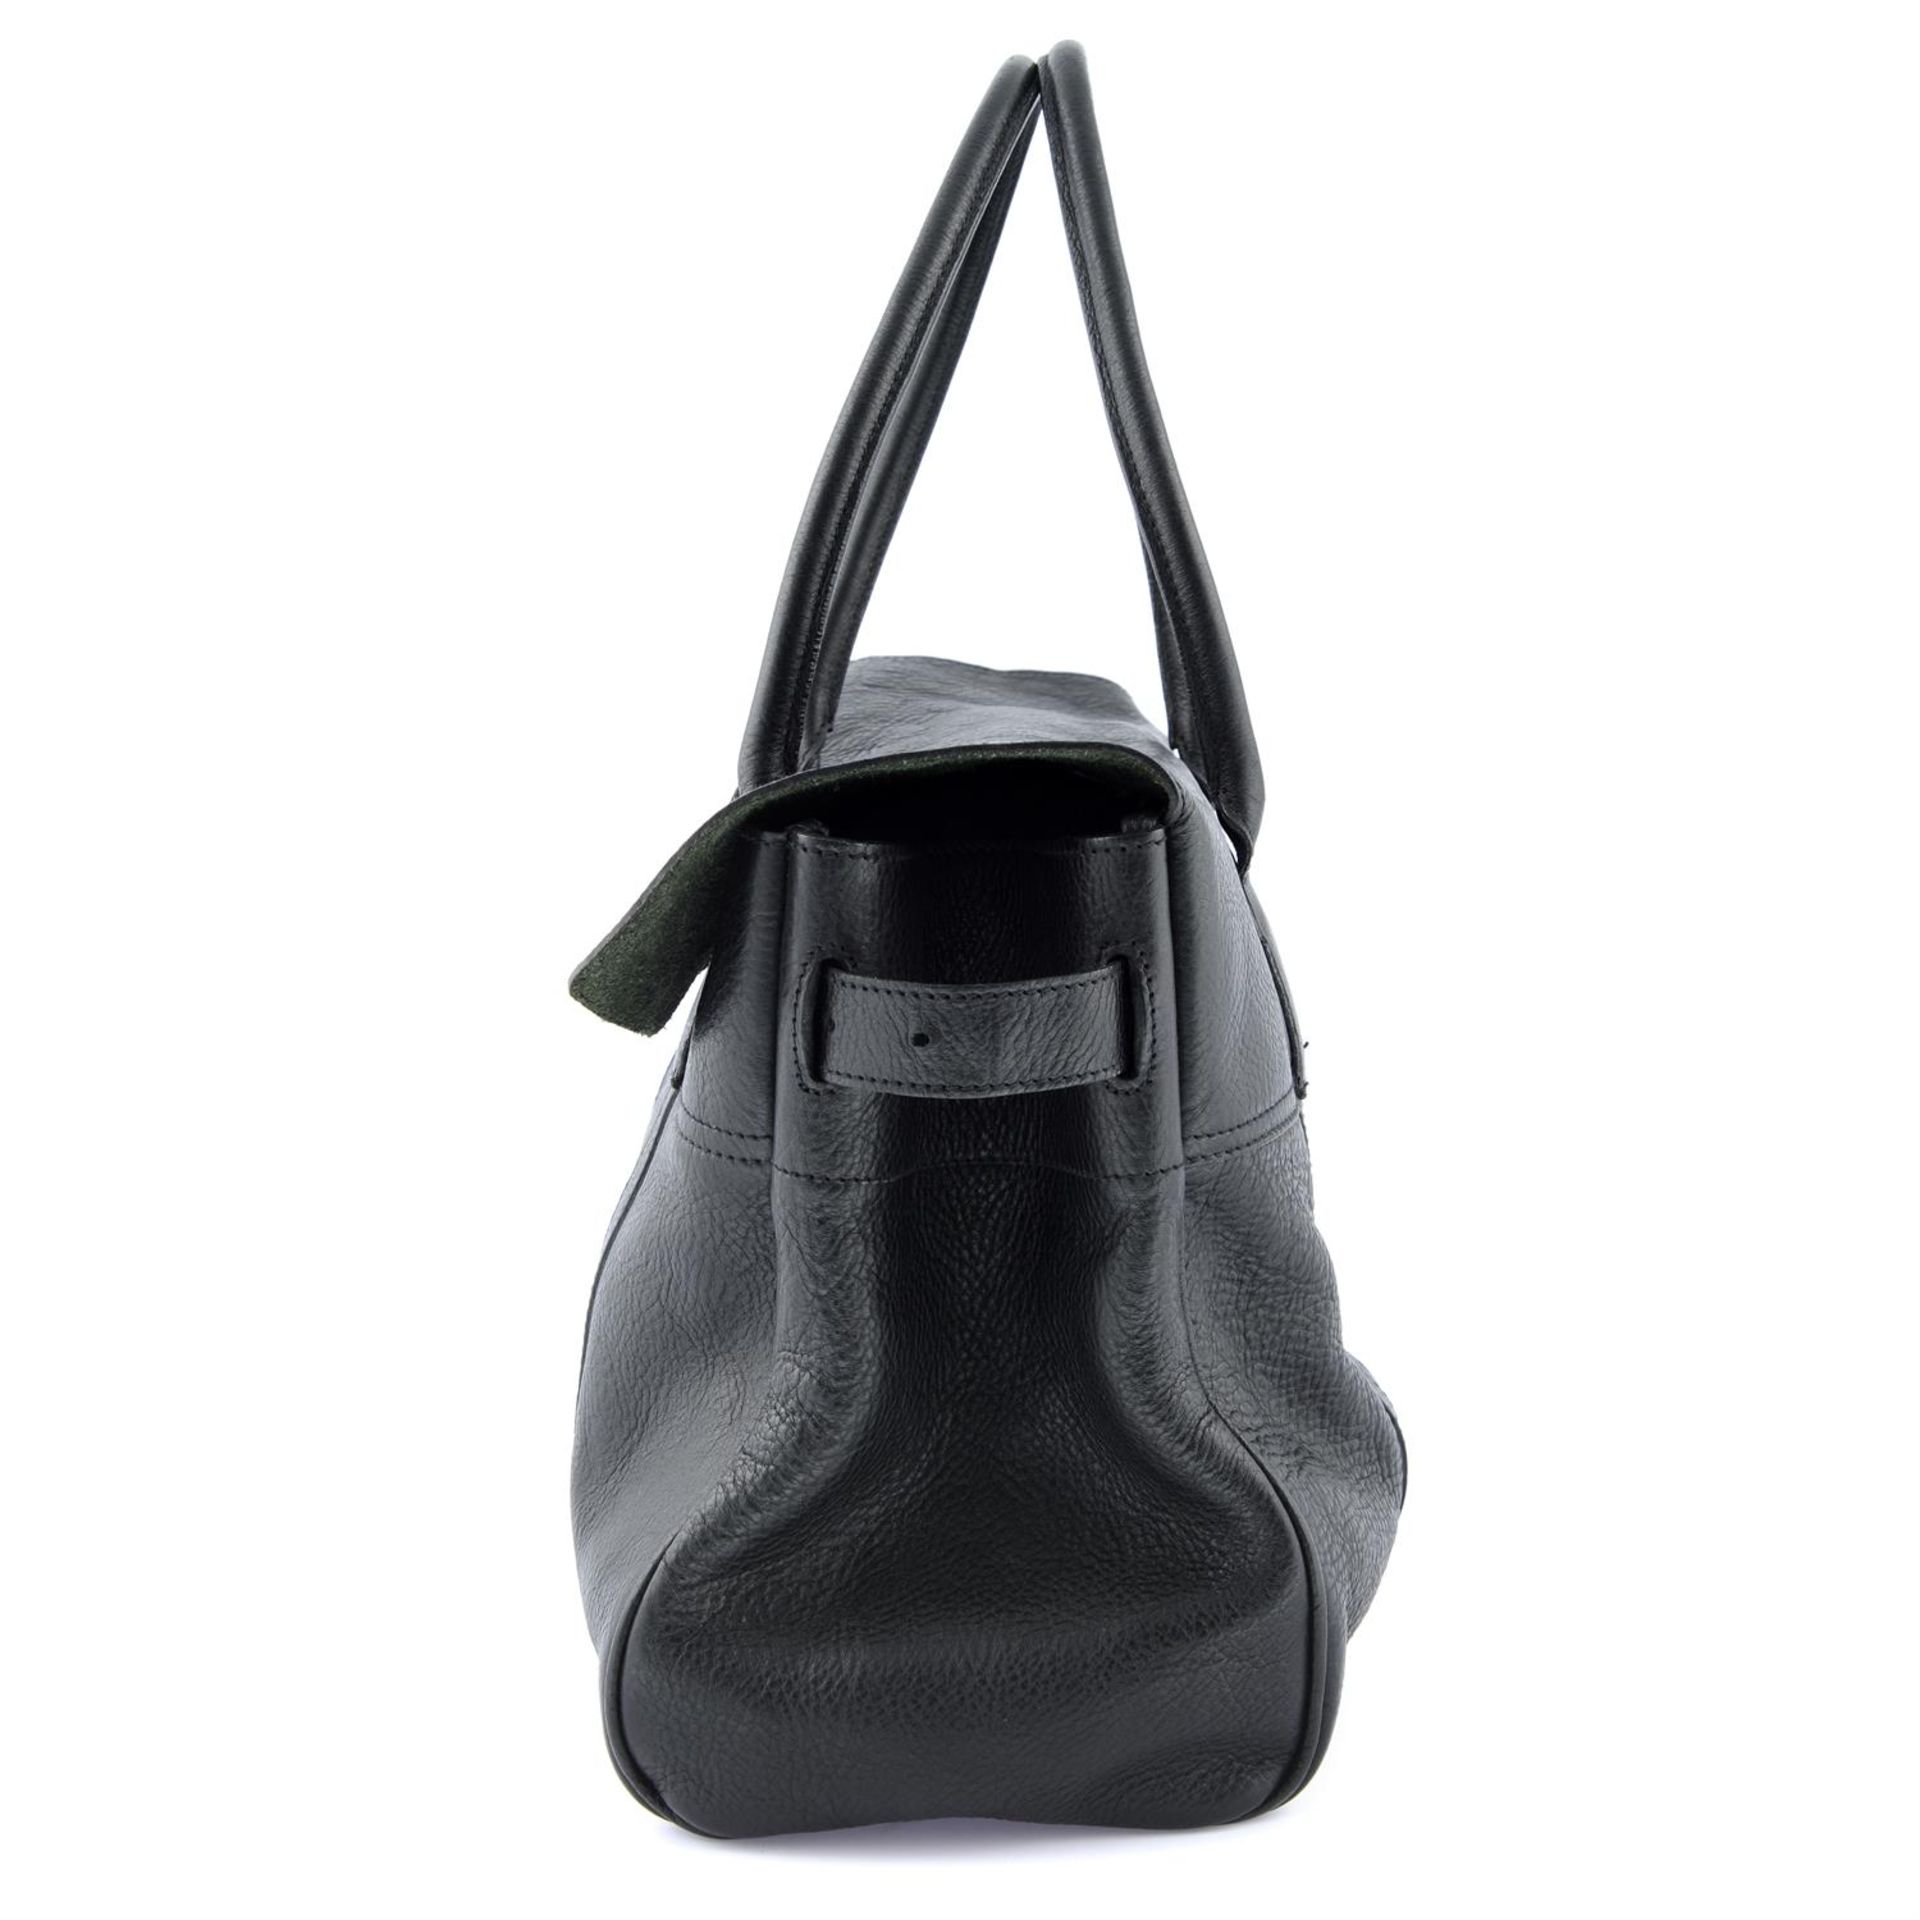 MULBERRY - a black leather Bayswater handbag. - Image 3 of 4